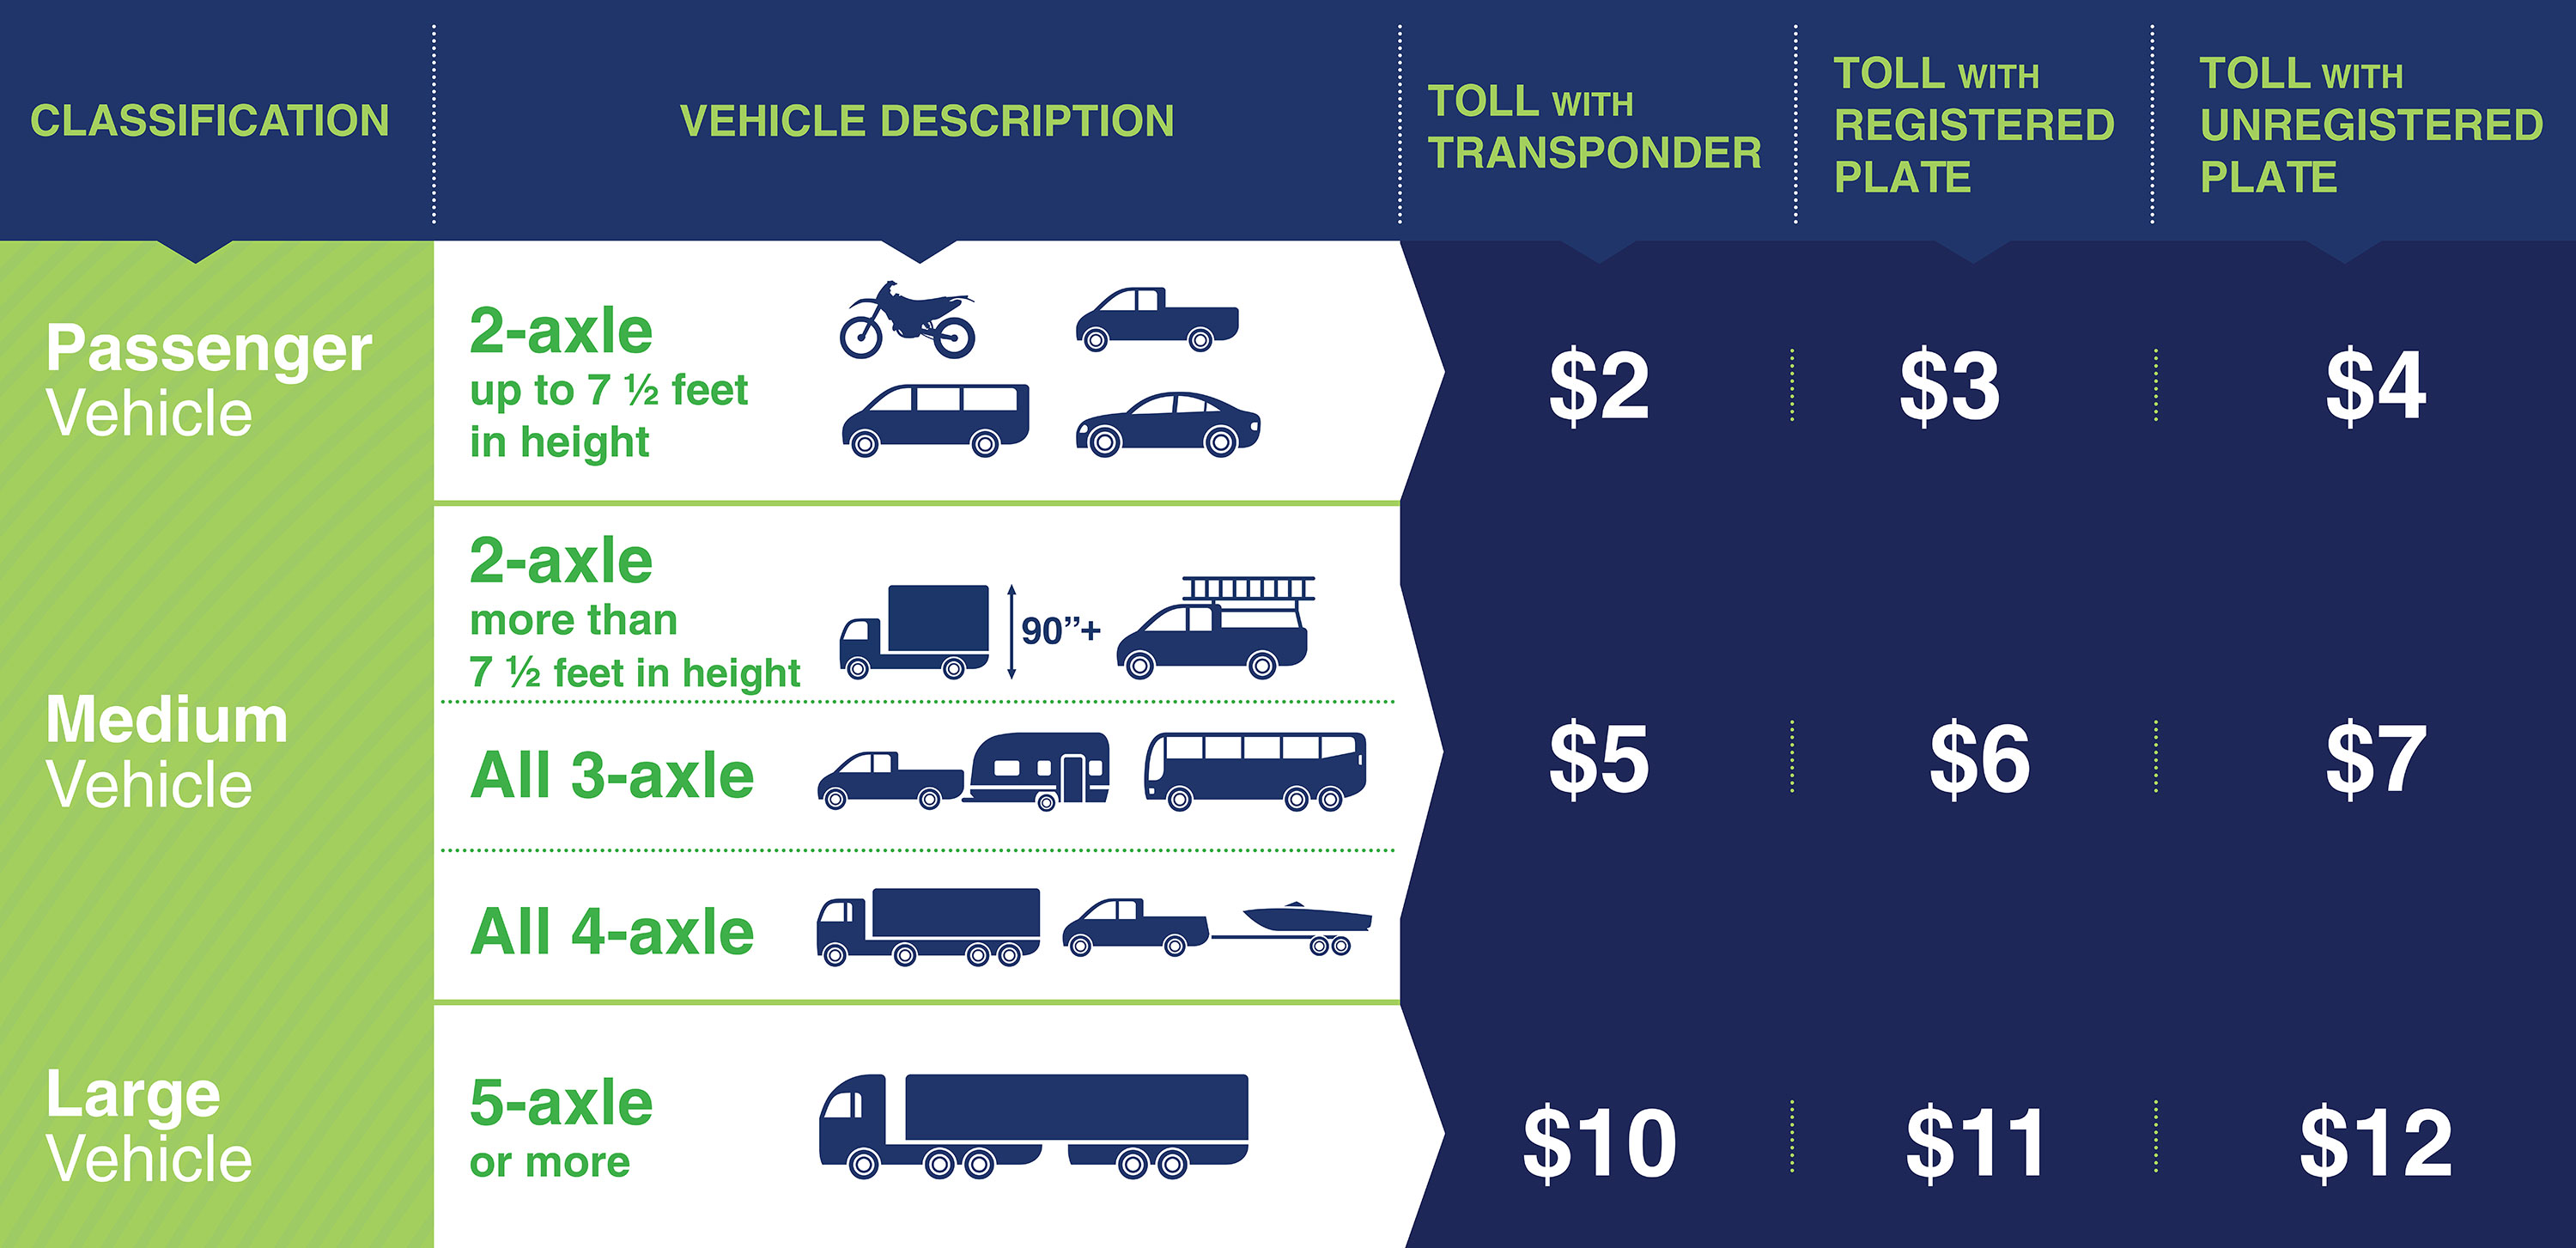 RiverLink Vehicle Classifications